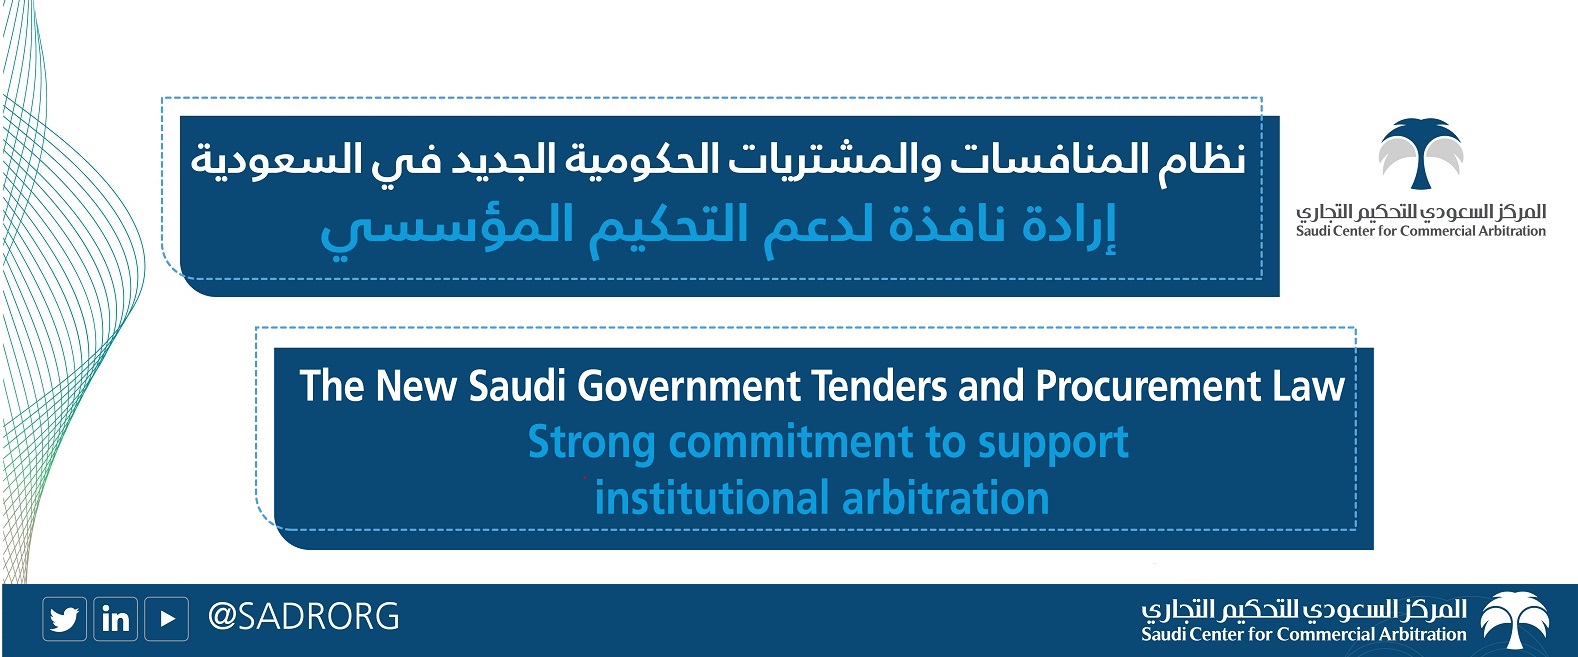 The New “Government Tenders & Procurement Law” opens a promising executive course for arbitration industry in KSA